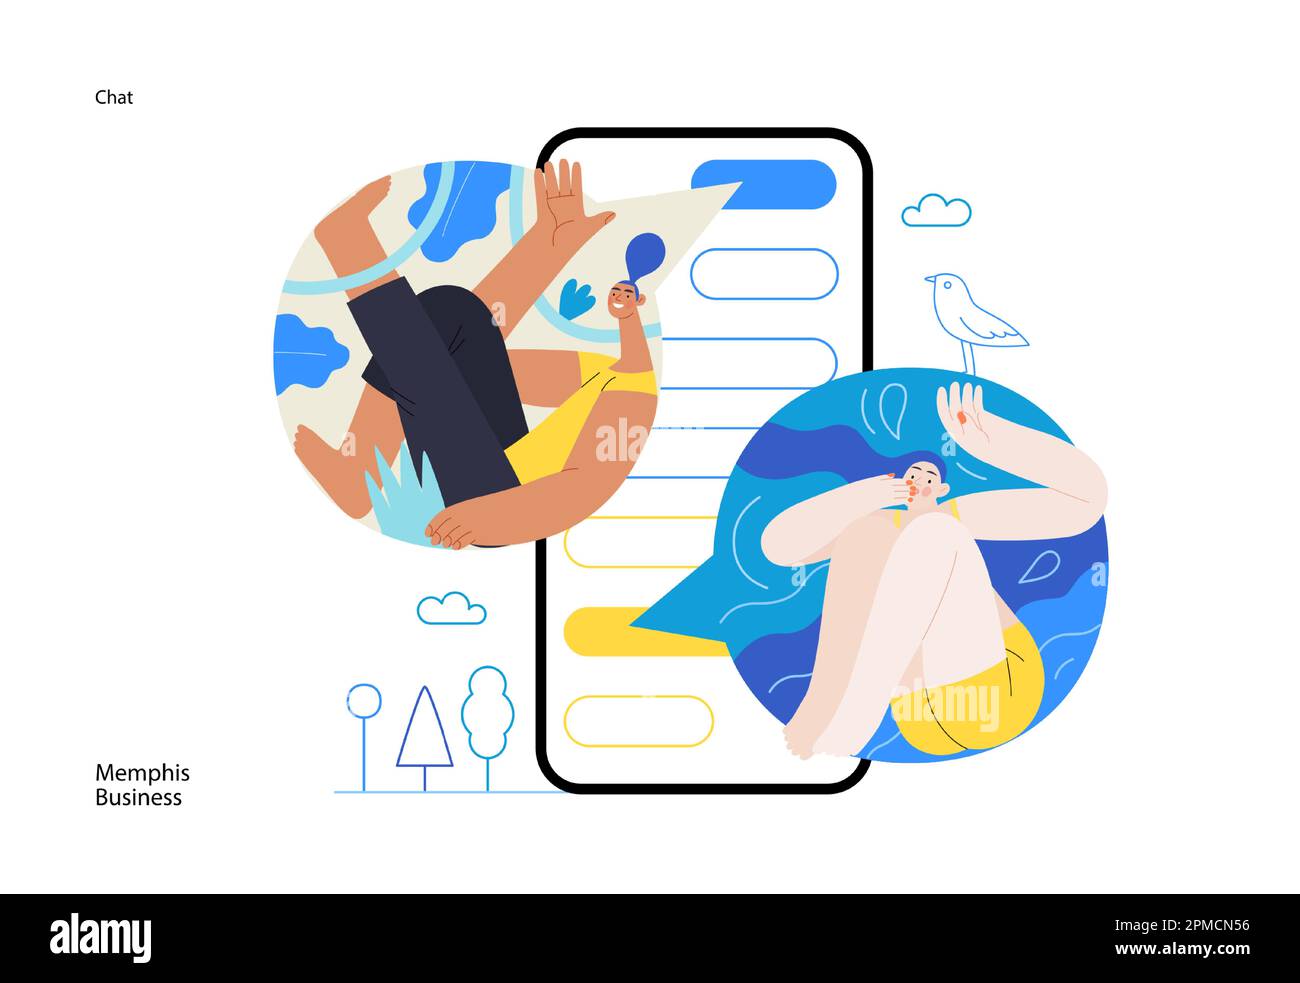 Memphis business illustration. Chat -modern flat vector concept illustration of people chatting in a phone messenger app, conversation, relations. Com Stock Vector